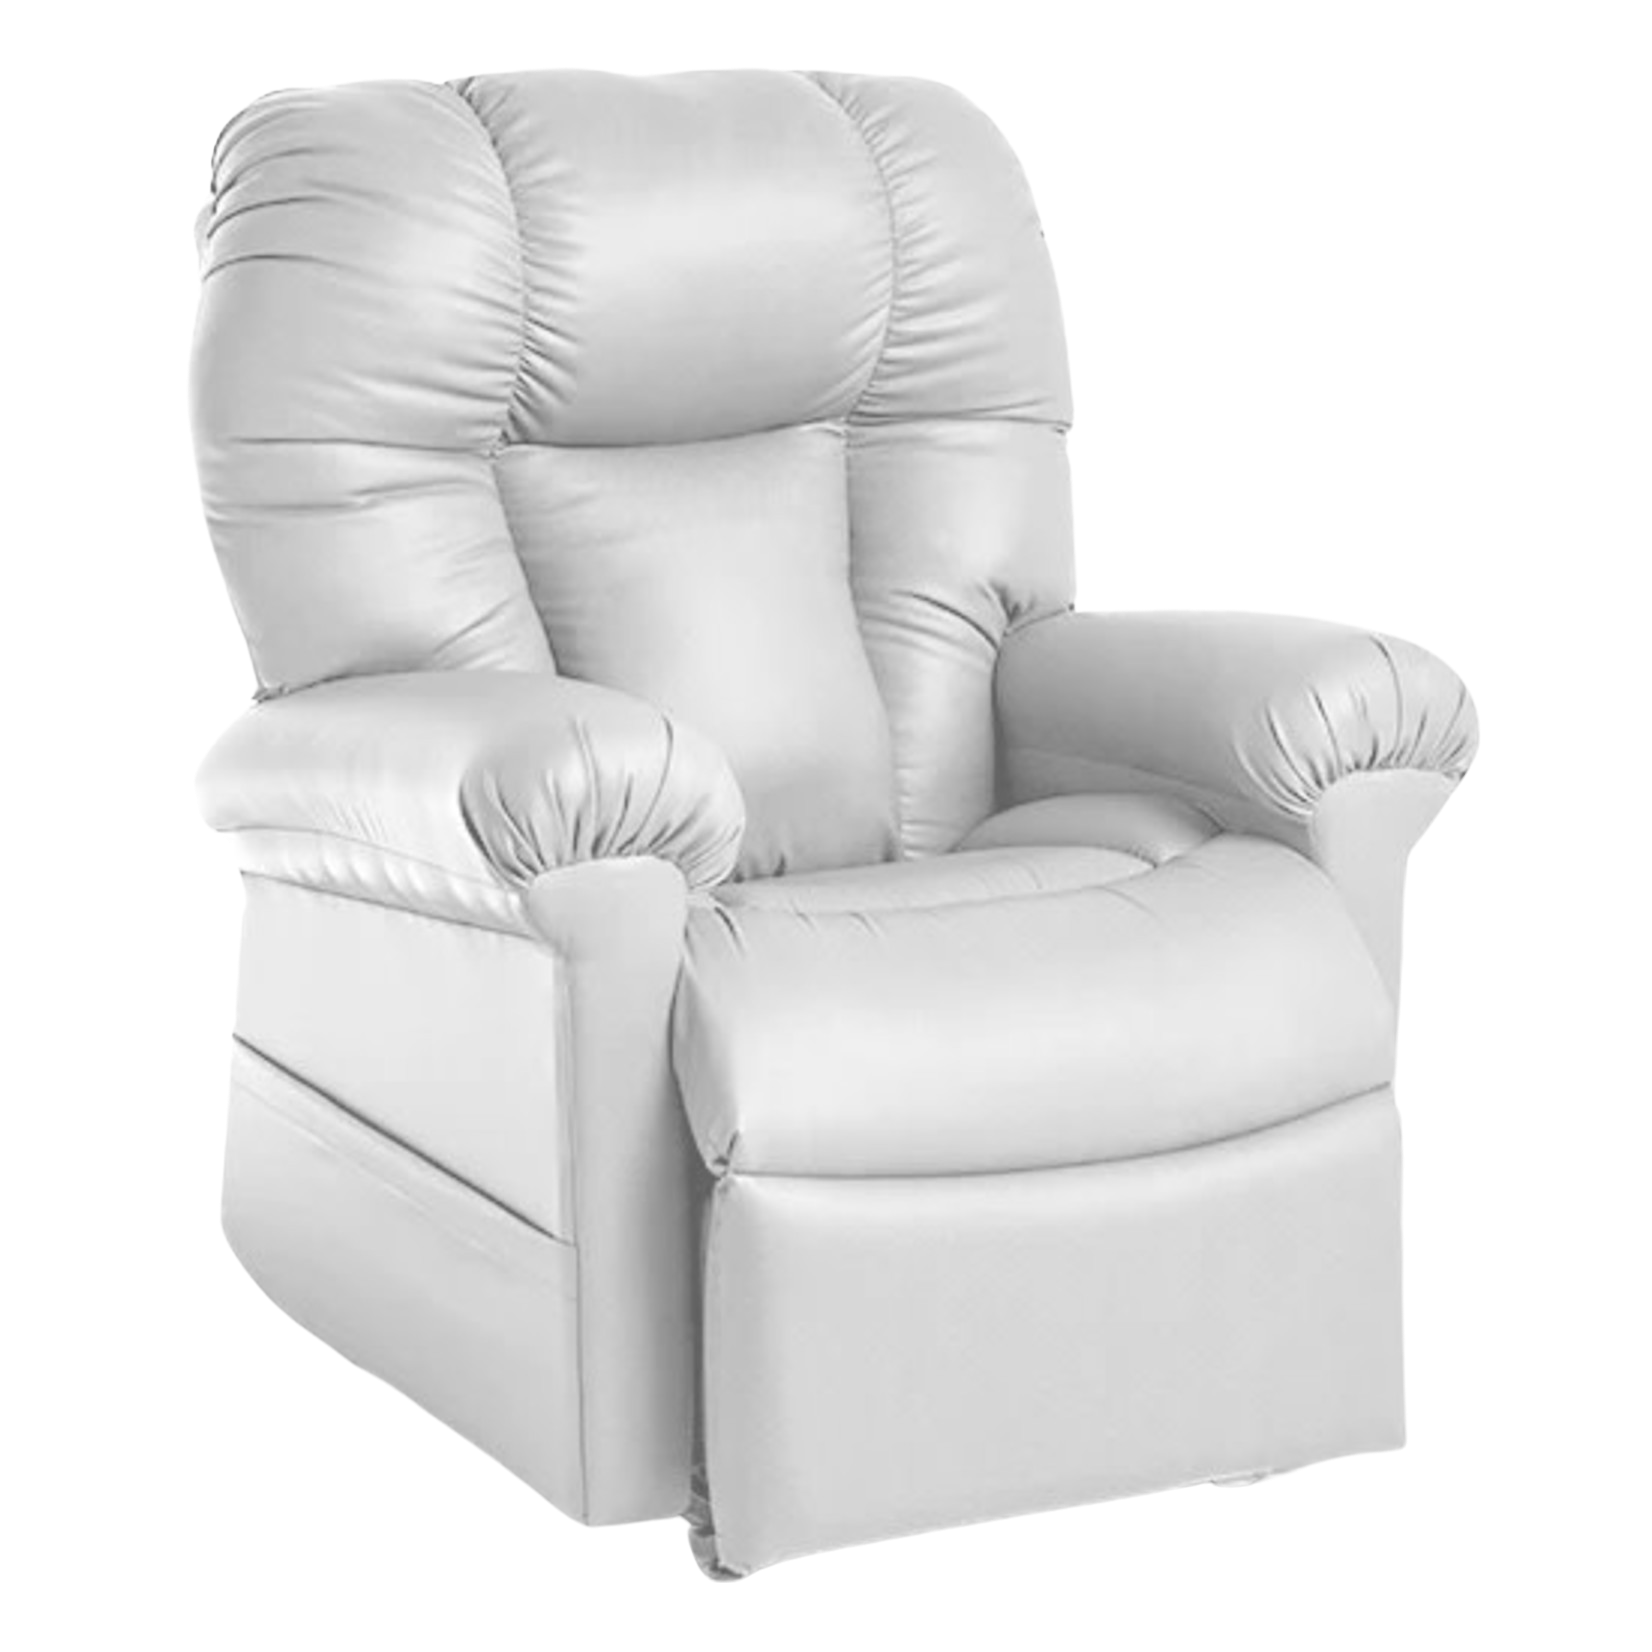 Journey, Journey Perfect Sleep Chair MiraLux Deluxe 5 Zone Lift with Heat and Massage 27202 New